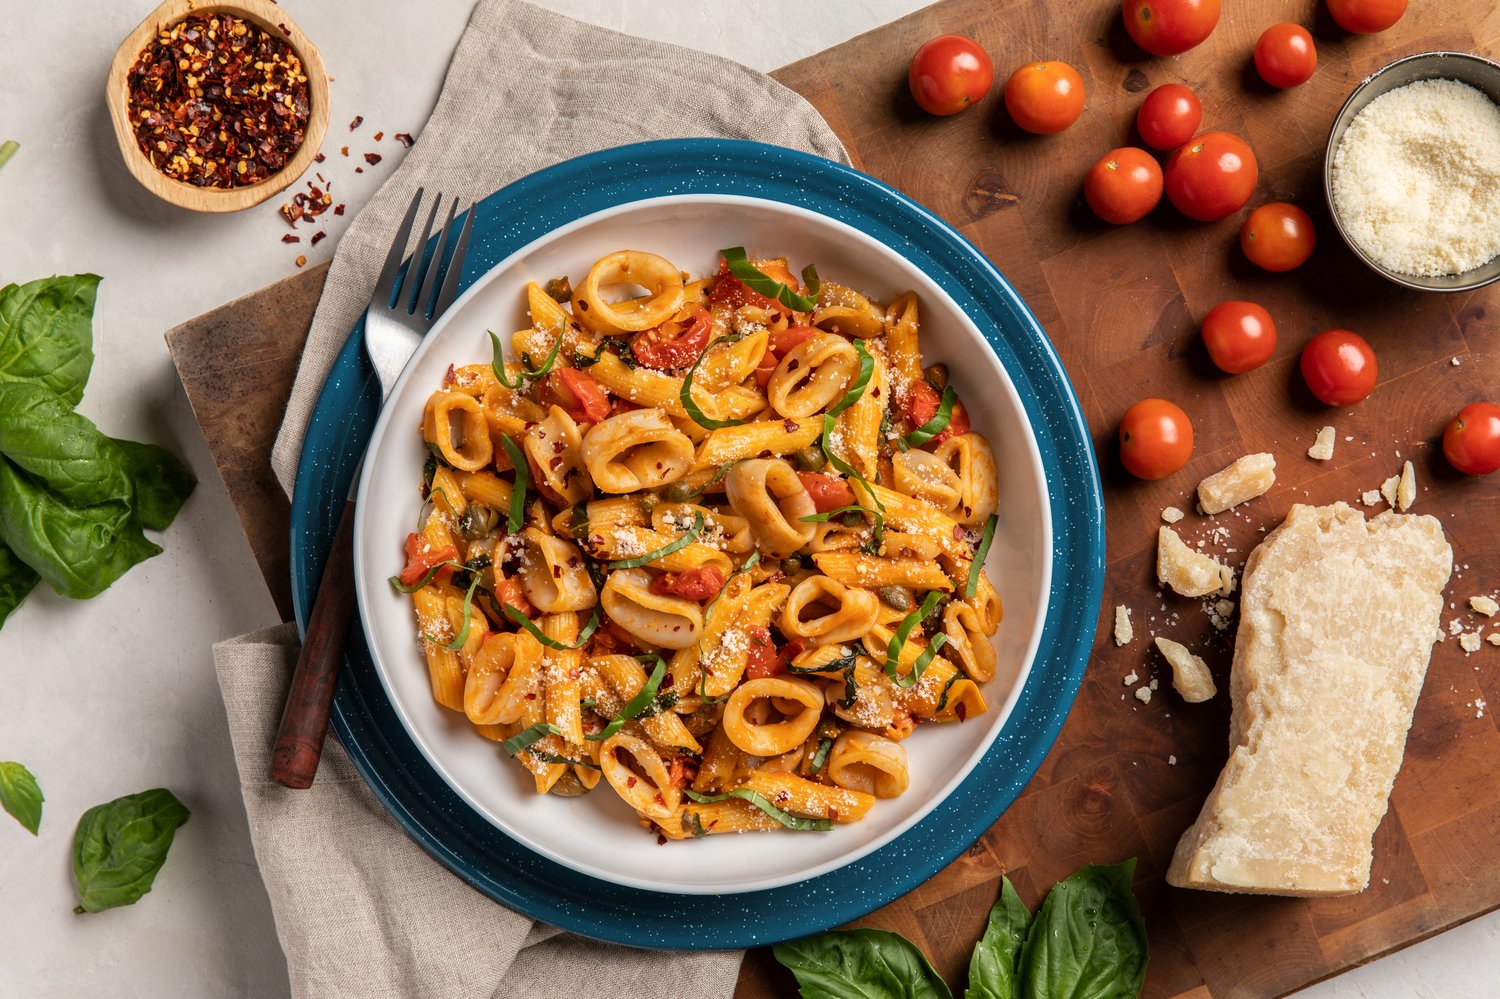 Recipe: Penne with Calamari and Cherry Tomatoes